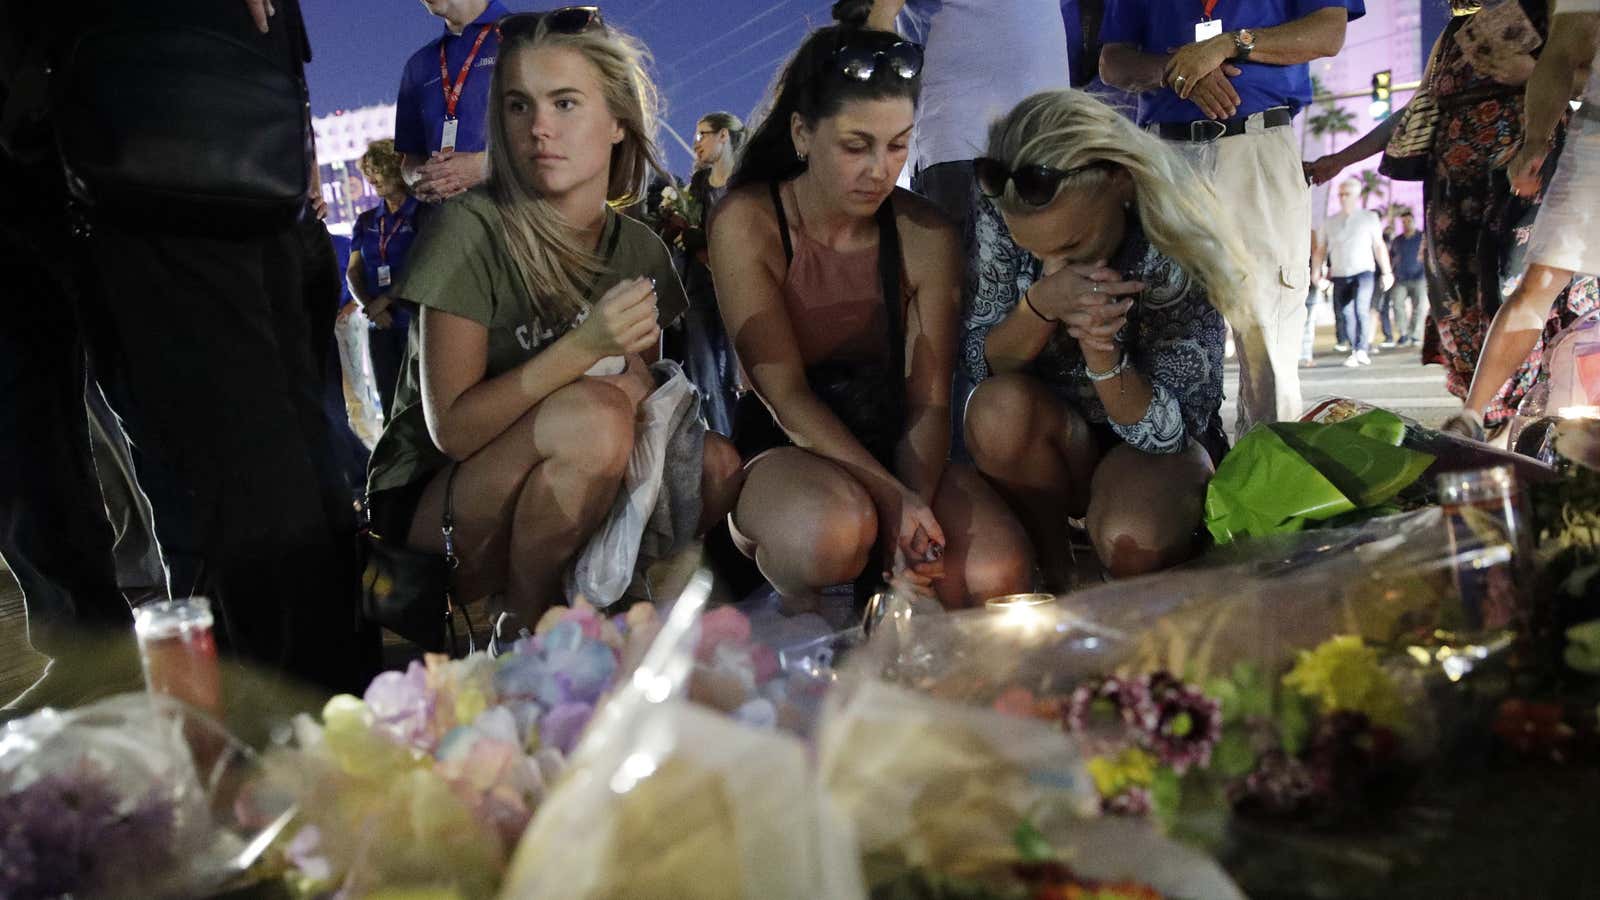 People mourn the dozens killed by Paddock.